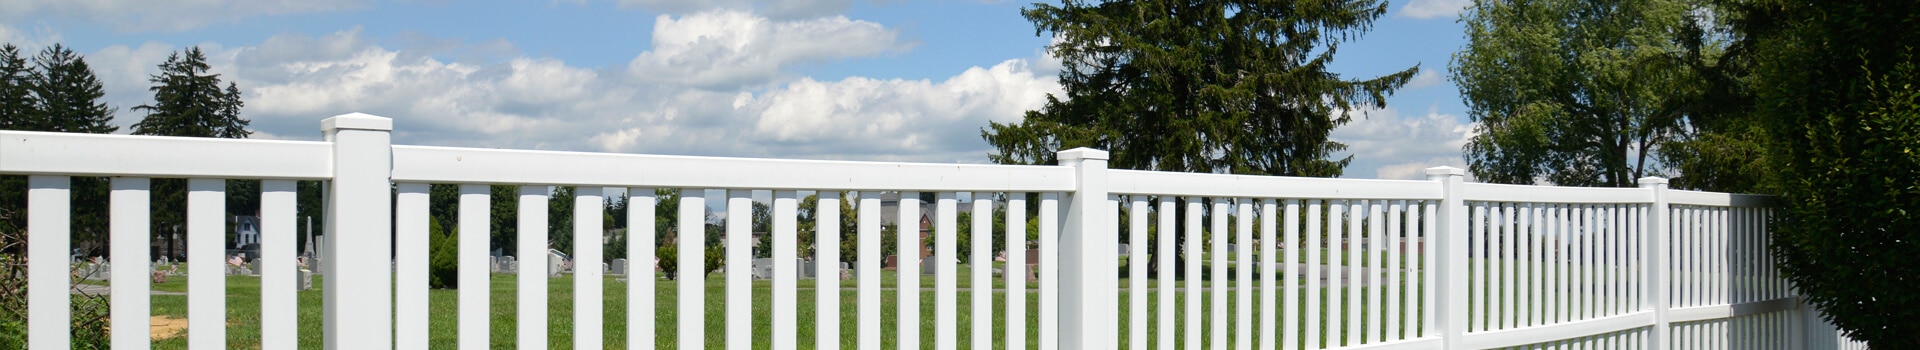 Hanging Flower Pots with fence - Big Easy Fences